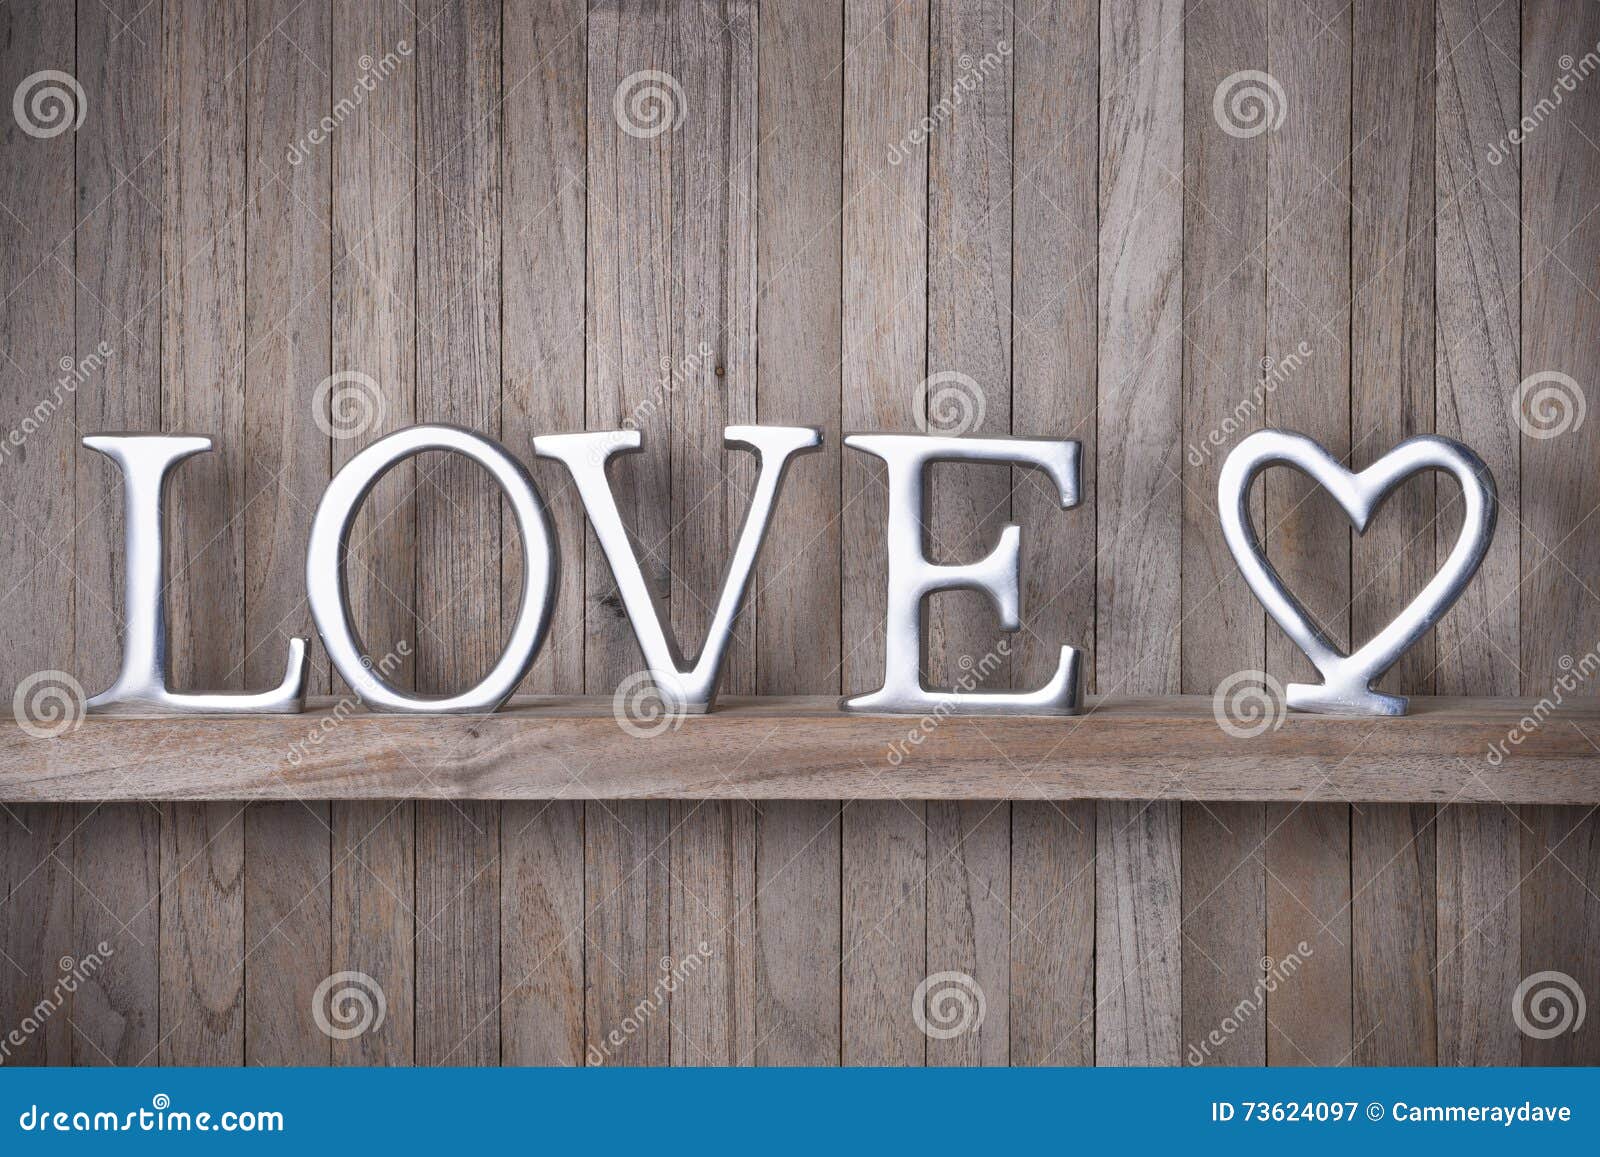 Love Heart Wood Background stock image. Image of banner - 73624097